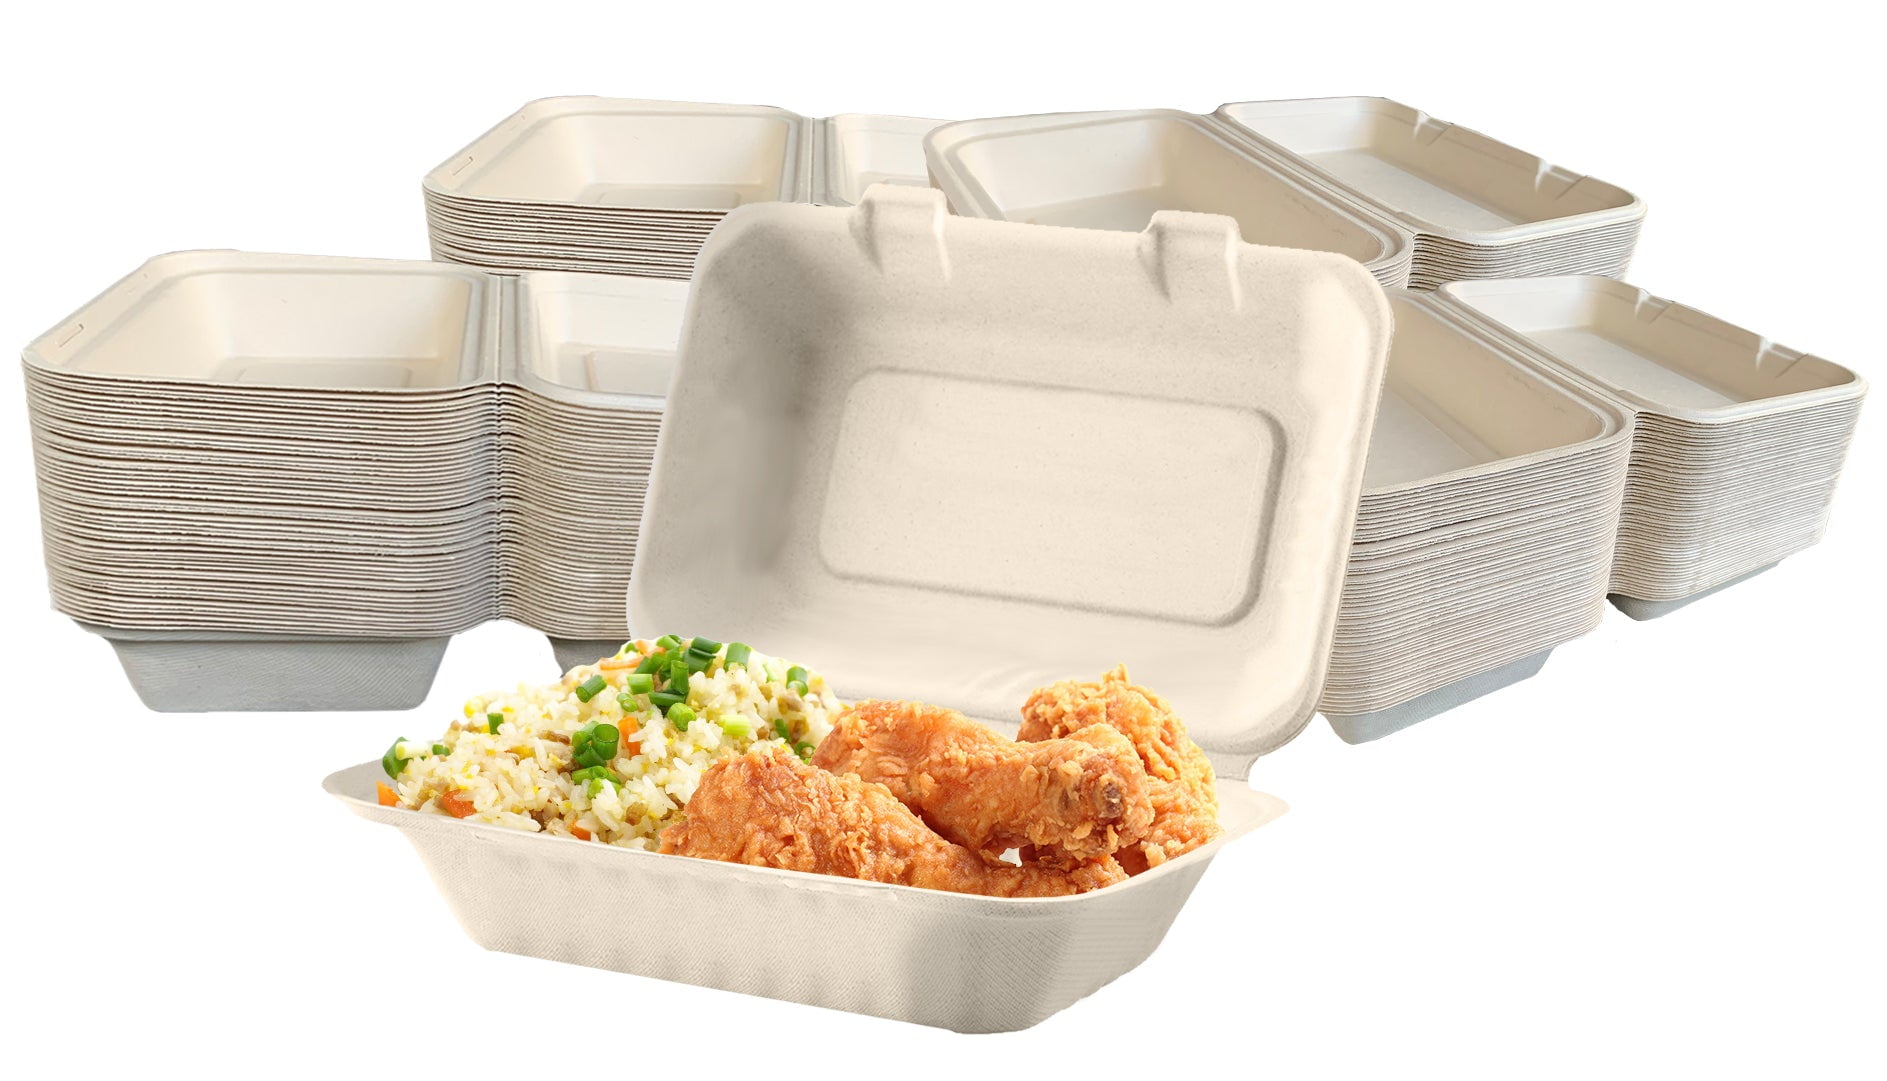 Clamshell Take Out Food Containers, [9 * 6 75-Pack] Disposable to